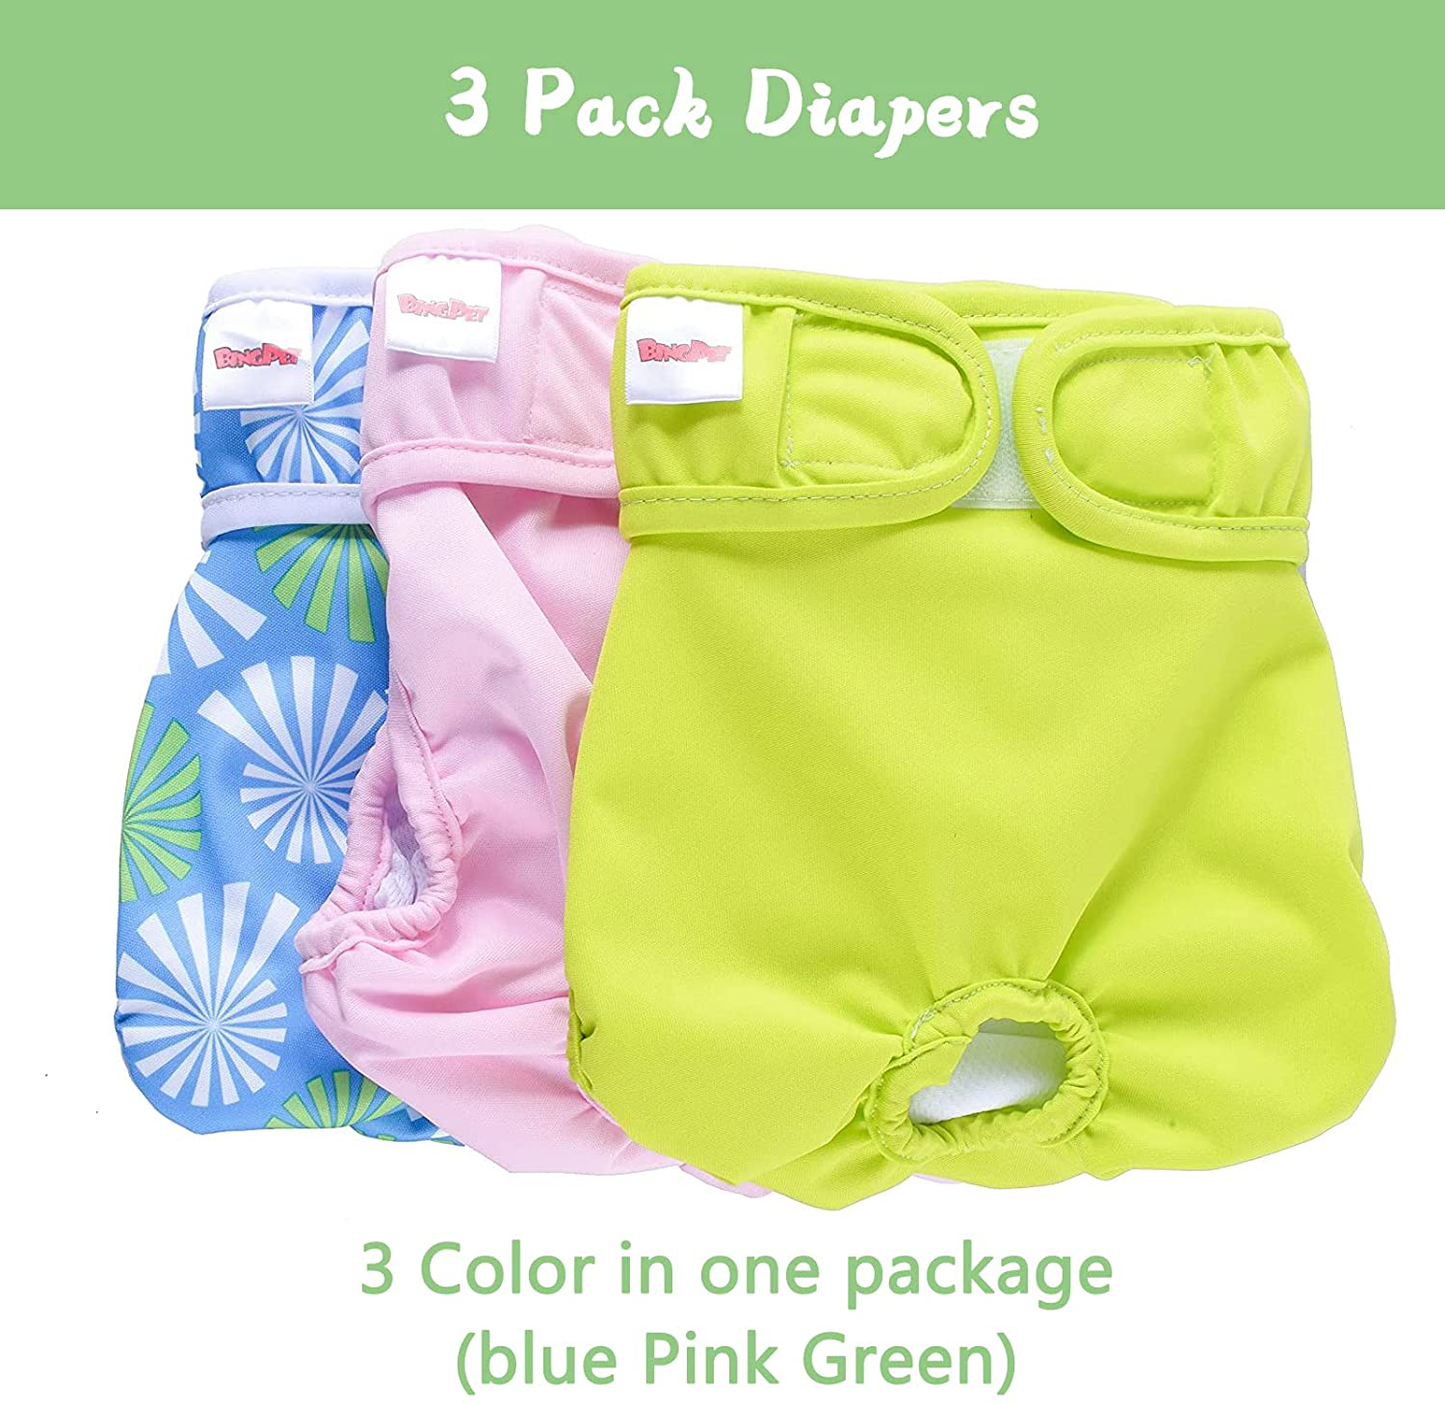 BINGPET Dog Diapers Female Washable Reusable (Pack of 3)